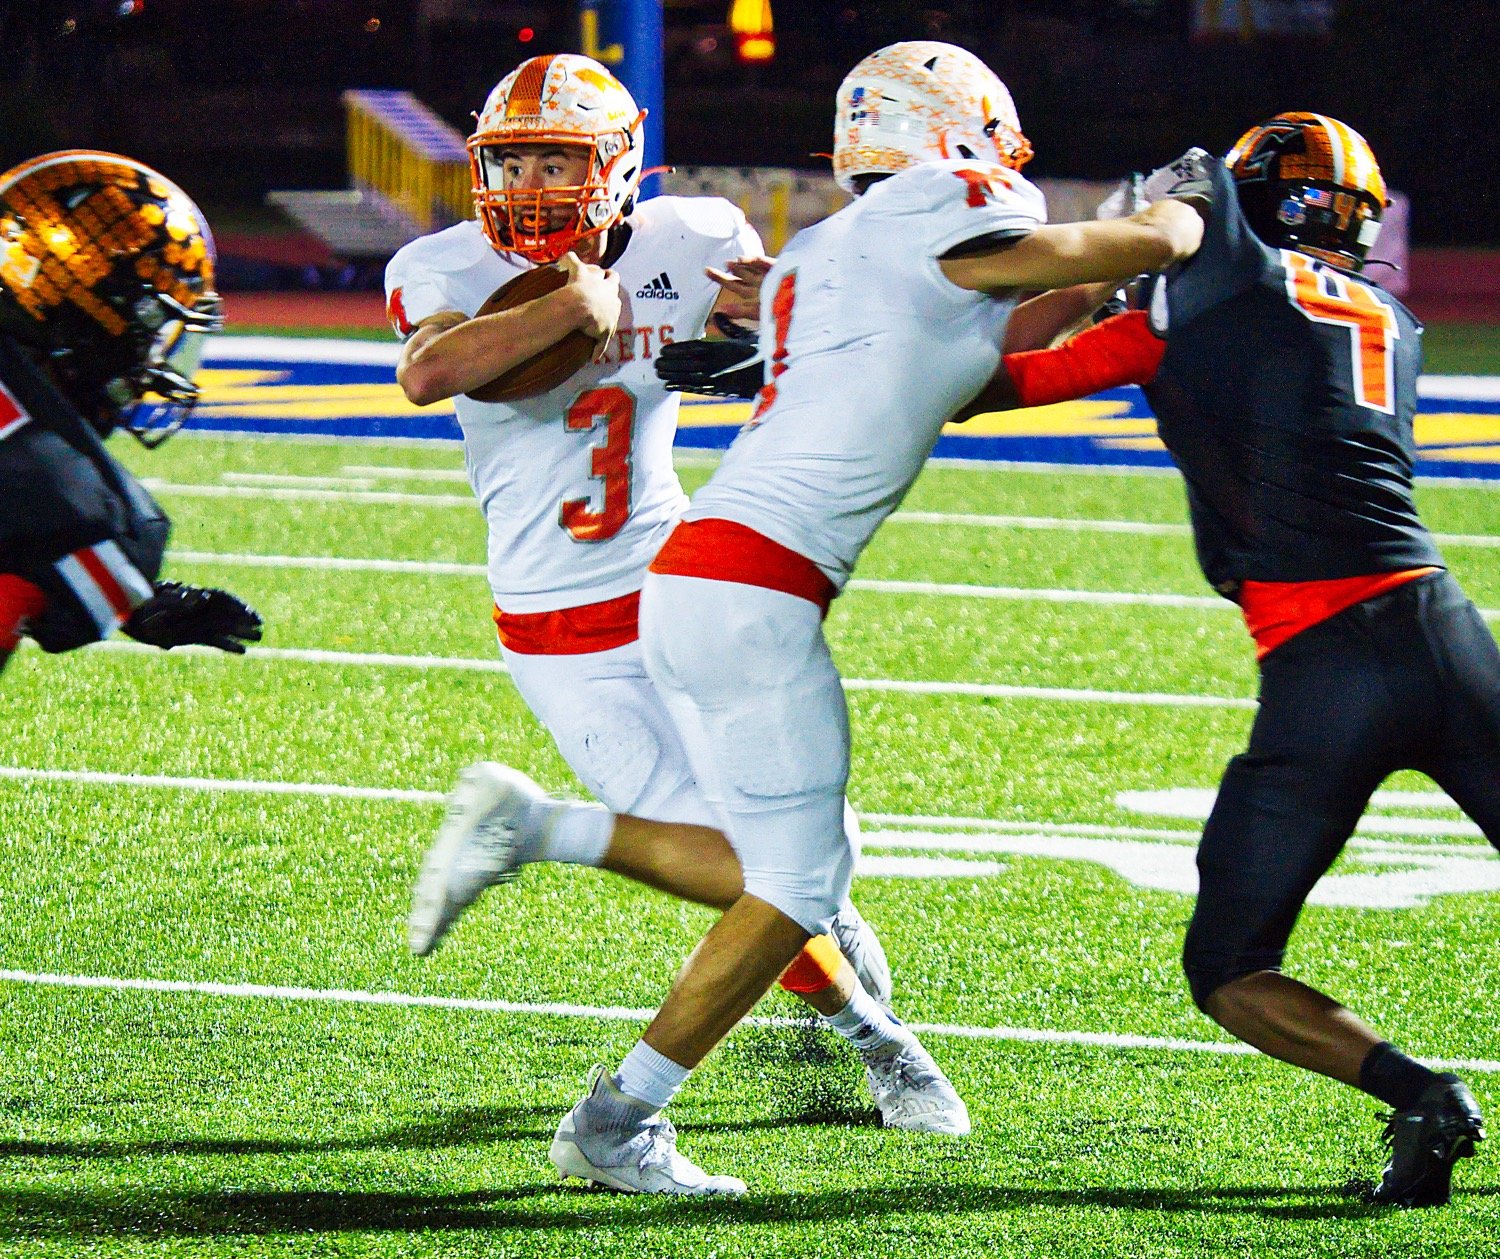 Mineola’s T.J. Moreland, 3, looks for an opening with blocking help from Thomas Hooten Friday against Commerce.
[see more action and buy prints]